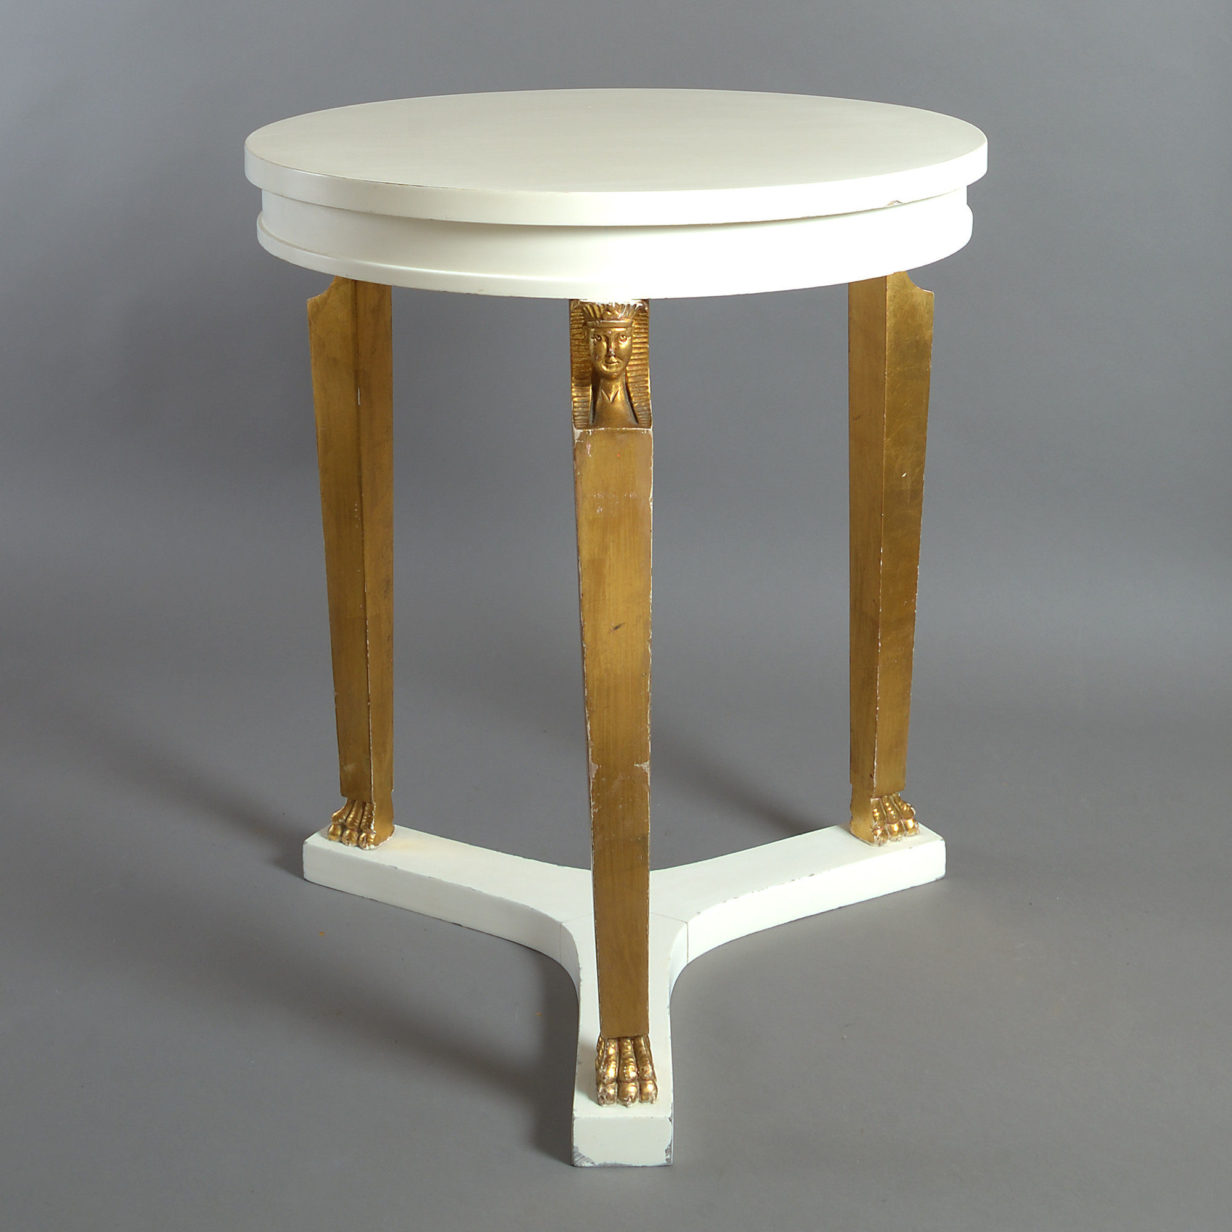 Mid-20th century pair of neo-classical circular end tables